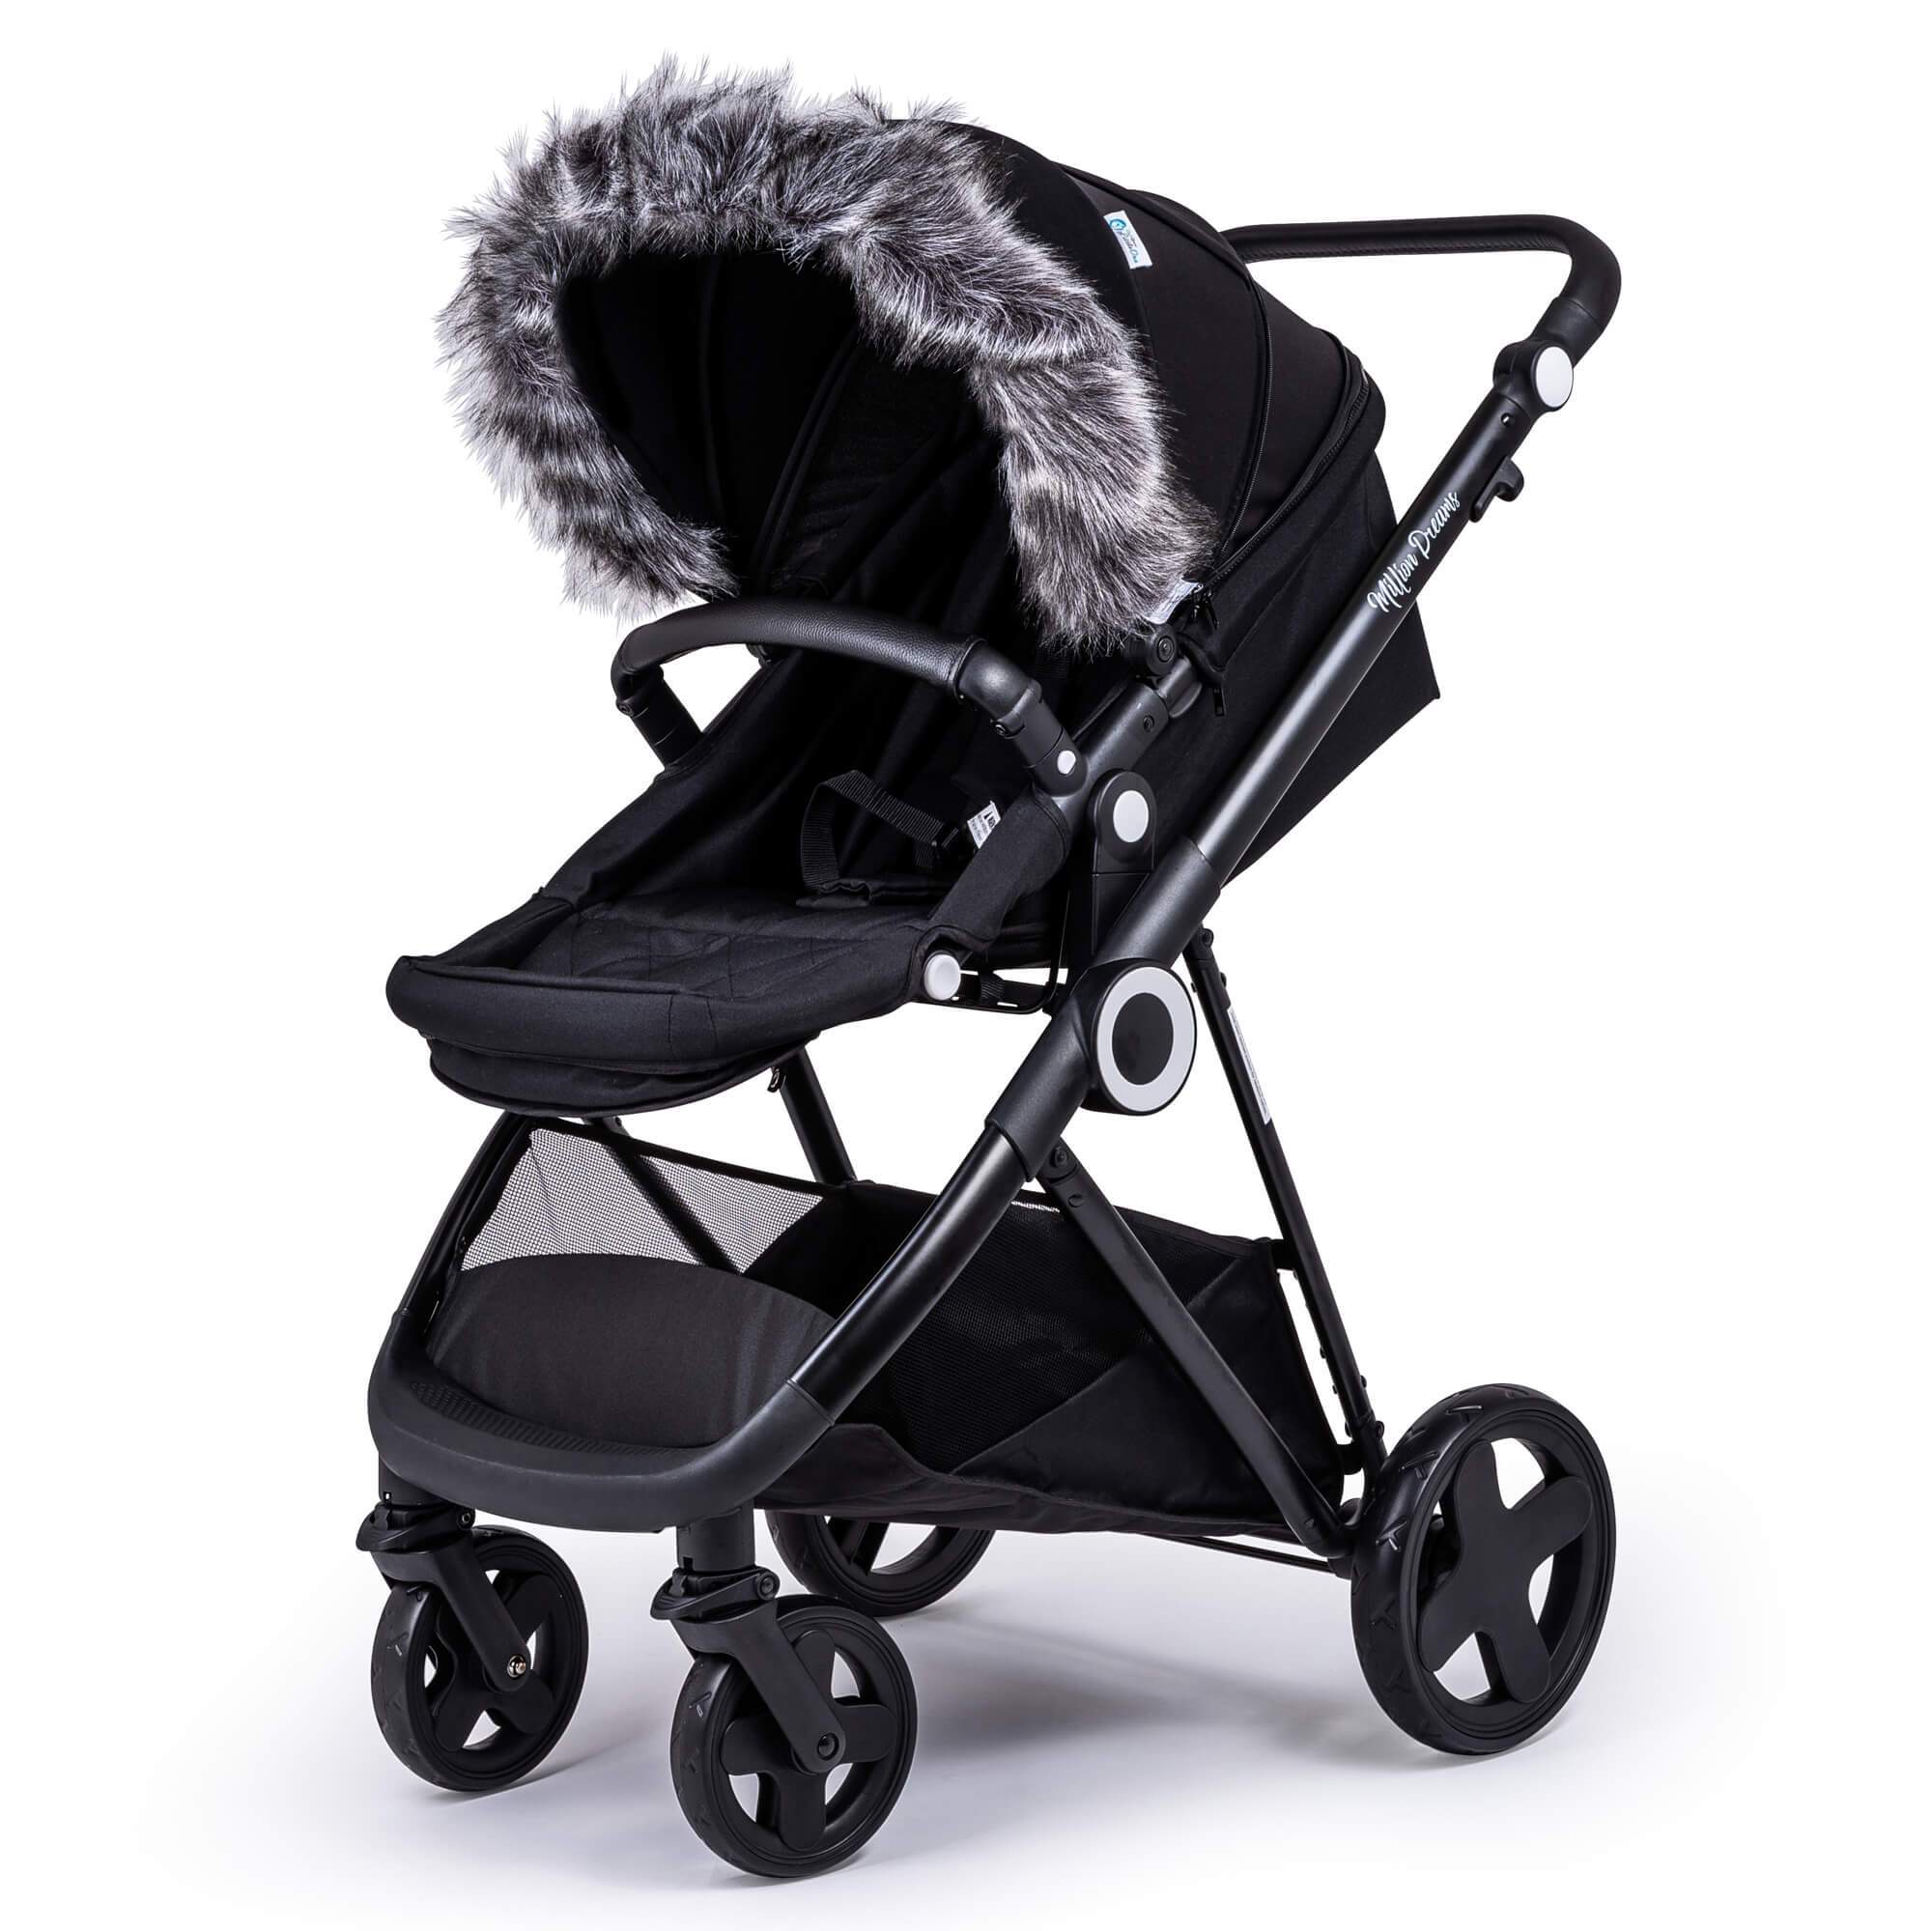 Pram Fur Hood Trim Attachment for Pushchair Compatible with iCandy - Dark Grey / Fits All Models | For Your Little One